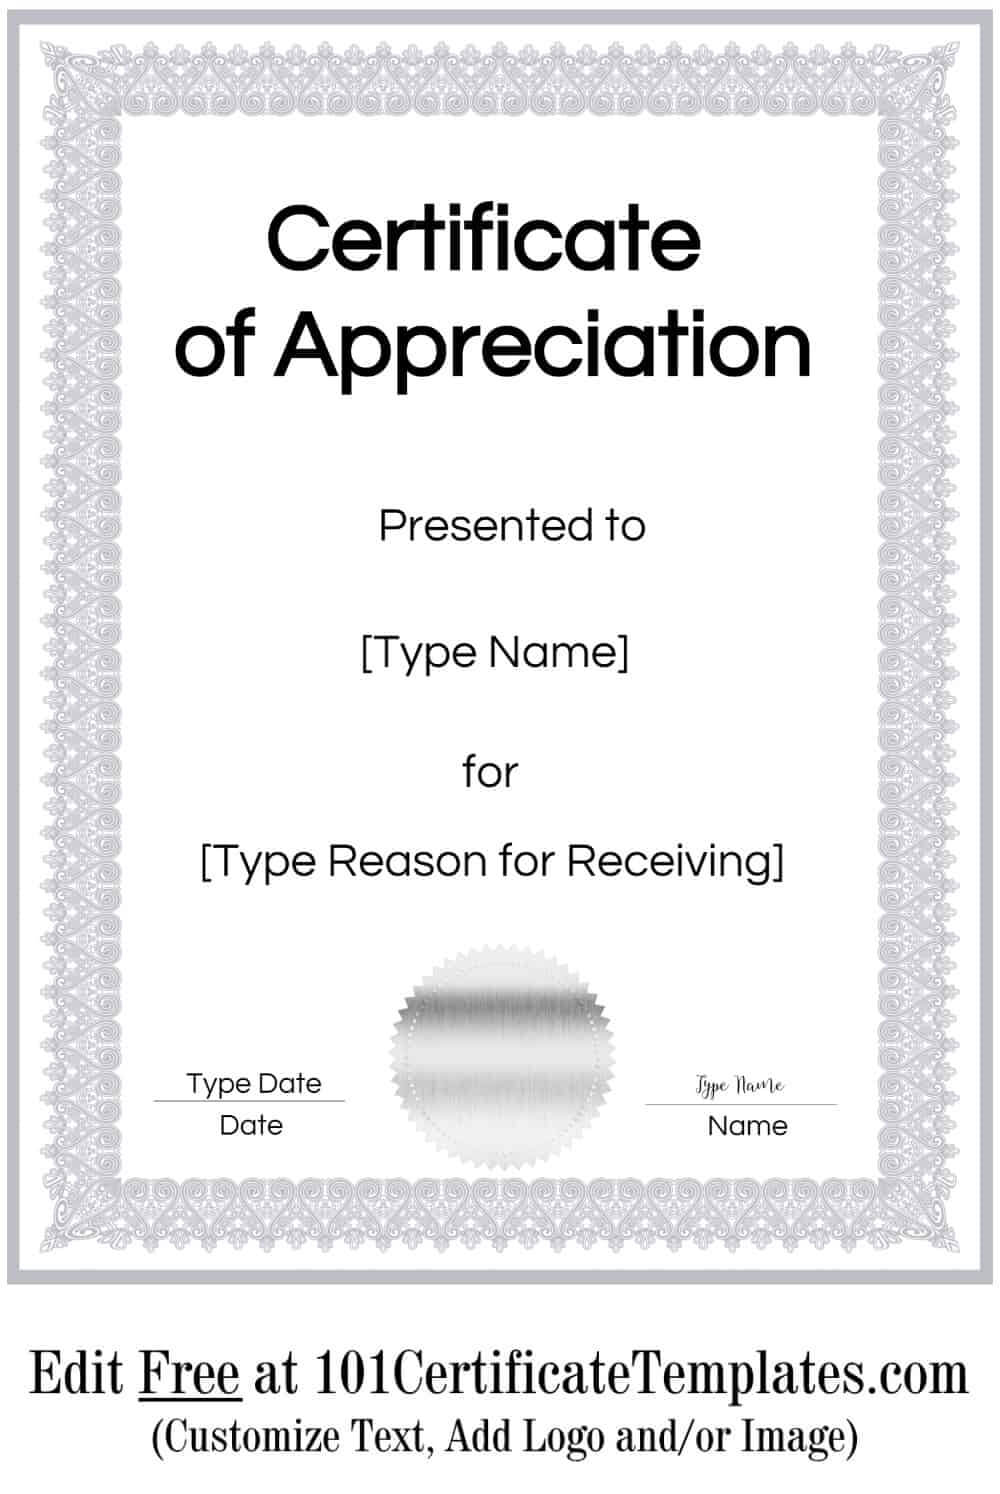 Certificate Of Appreciation With Certificate Of Attainment Template